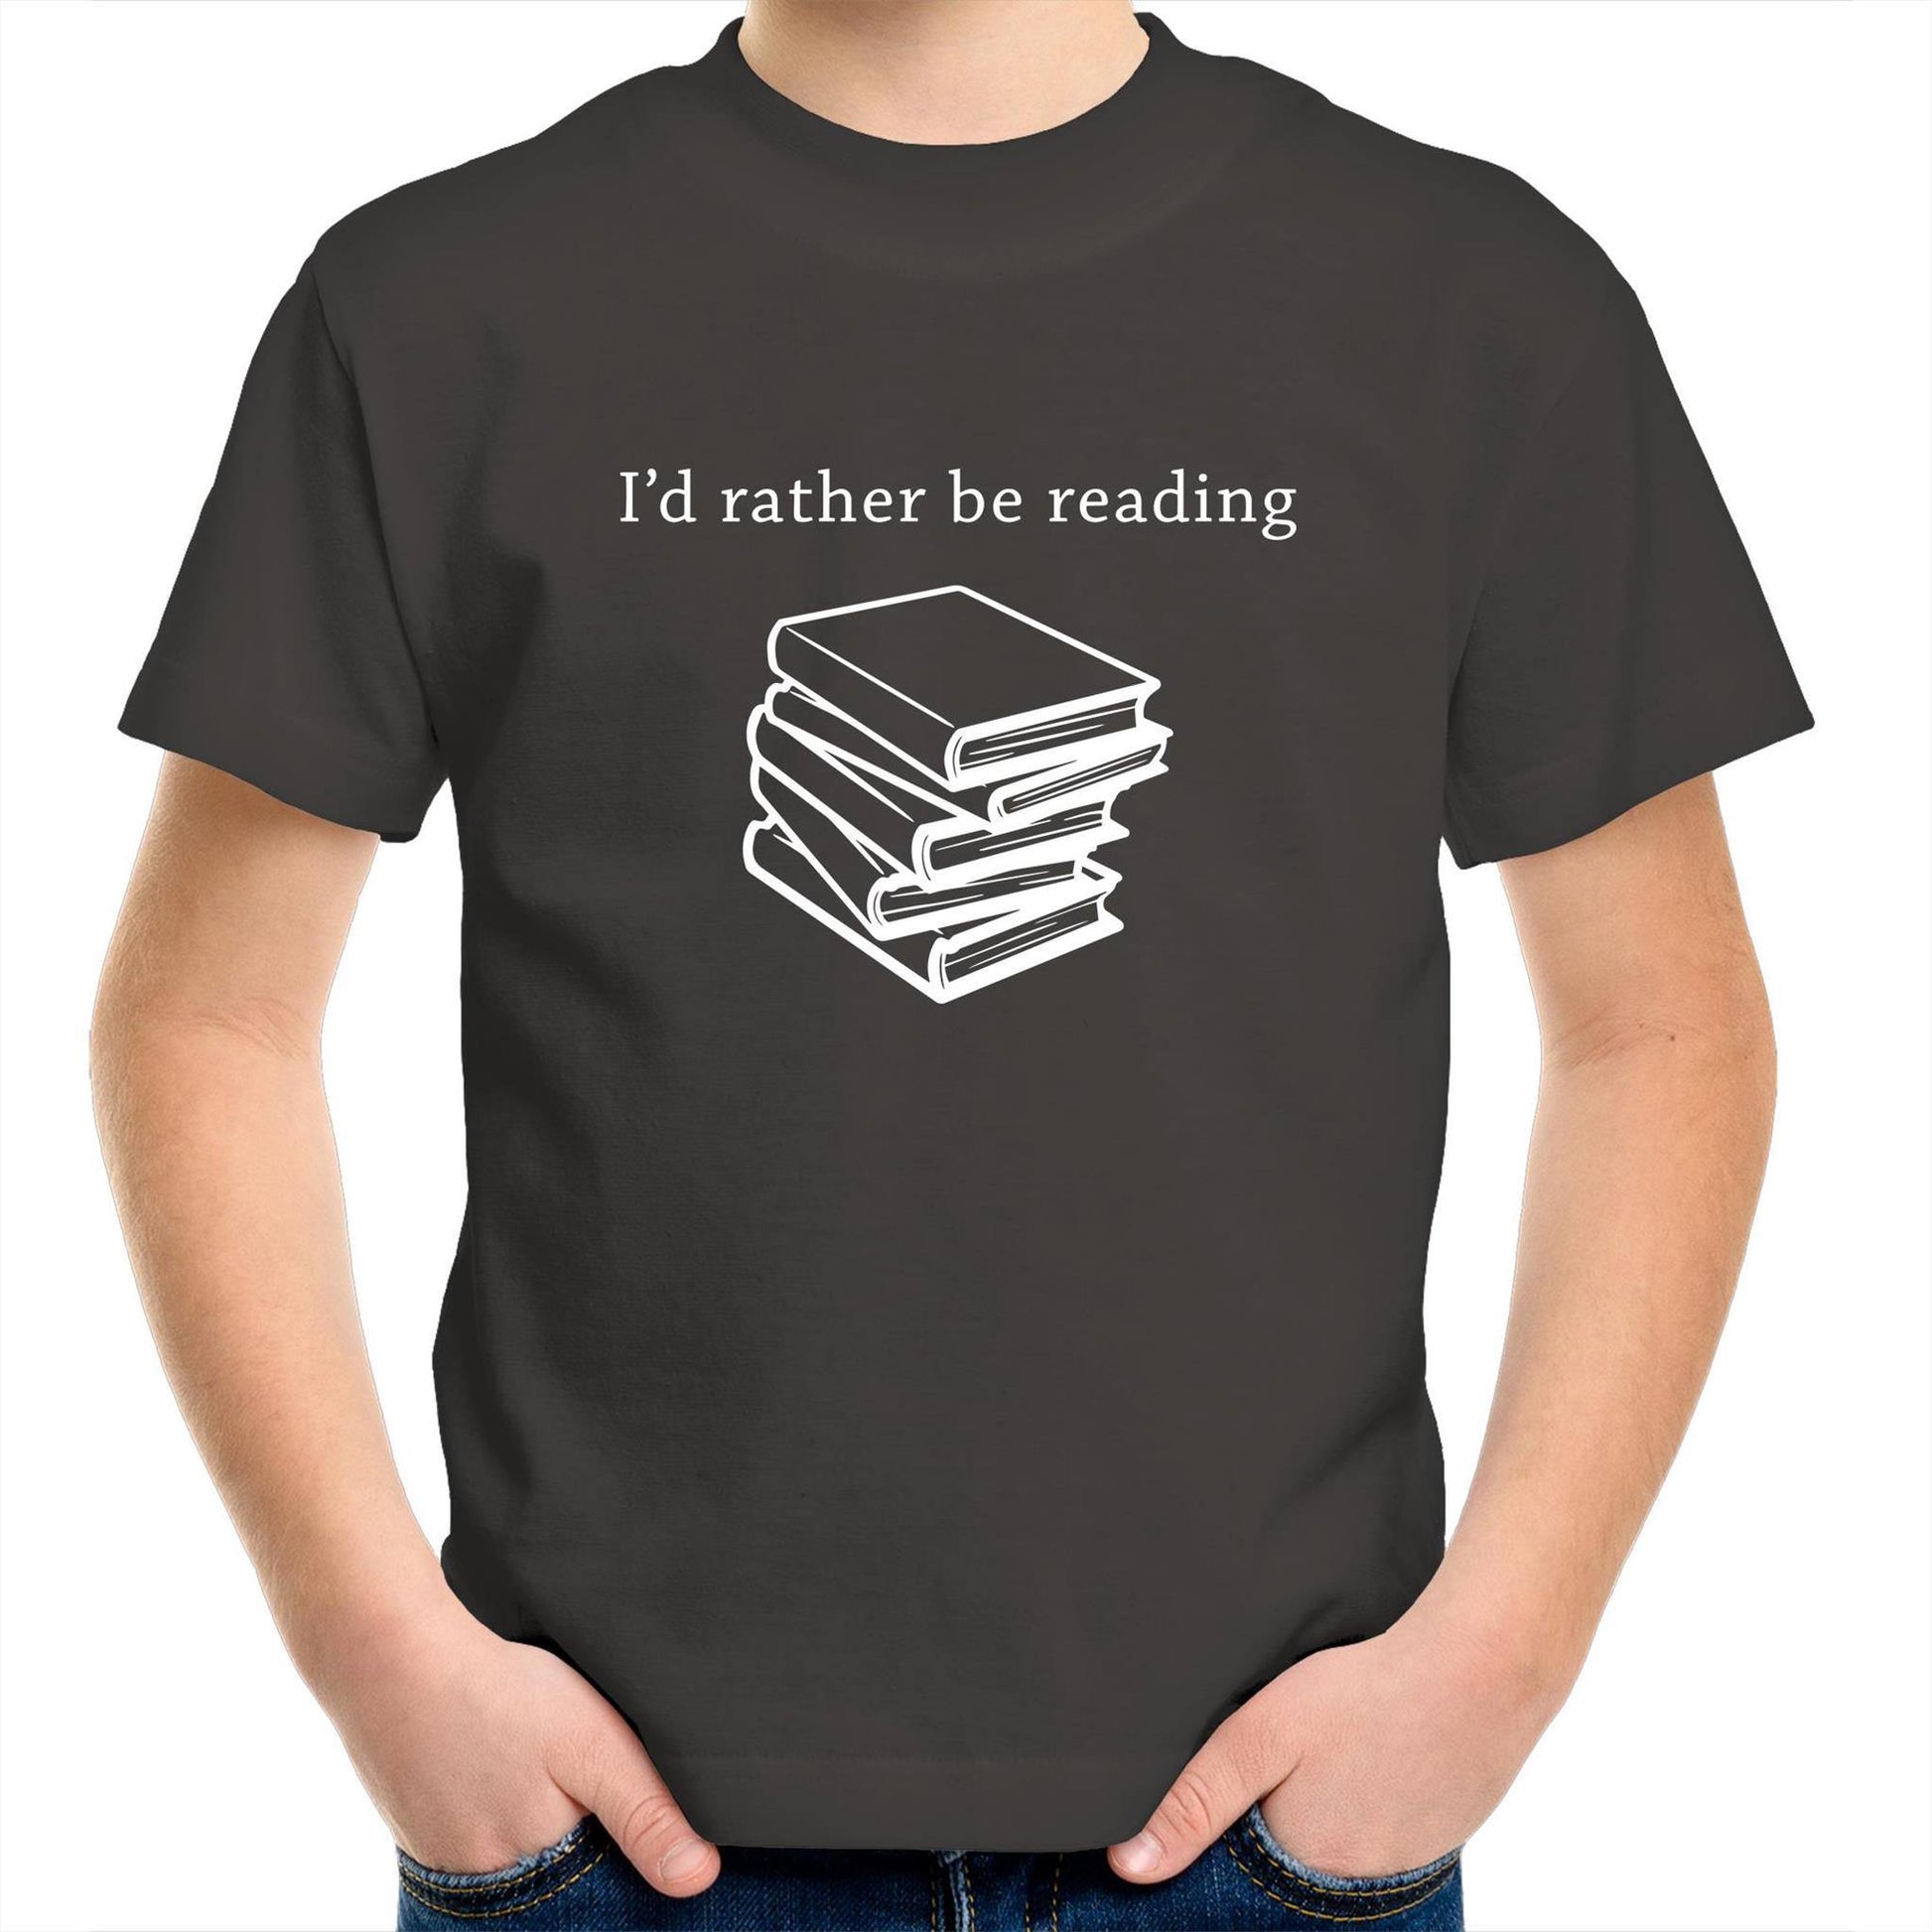 I'd Rather Be Reading - Kids Youth Crew T-Shirt Charcoal Kids Youth T-shirt Funny